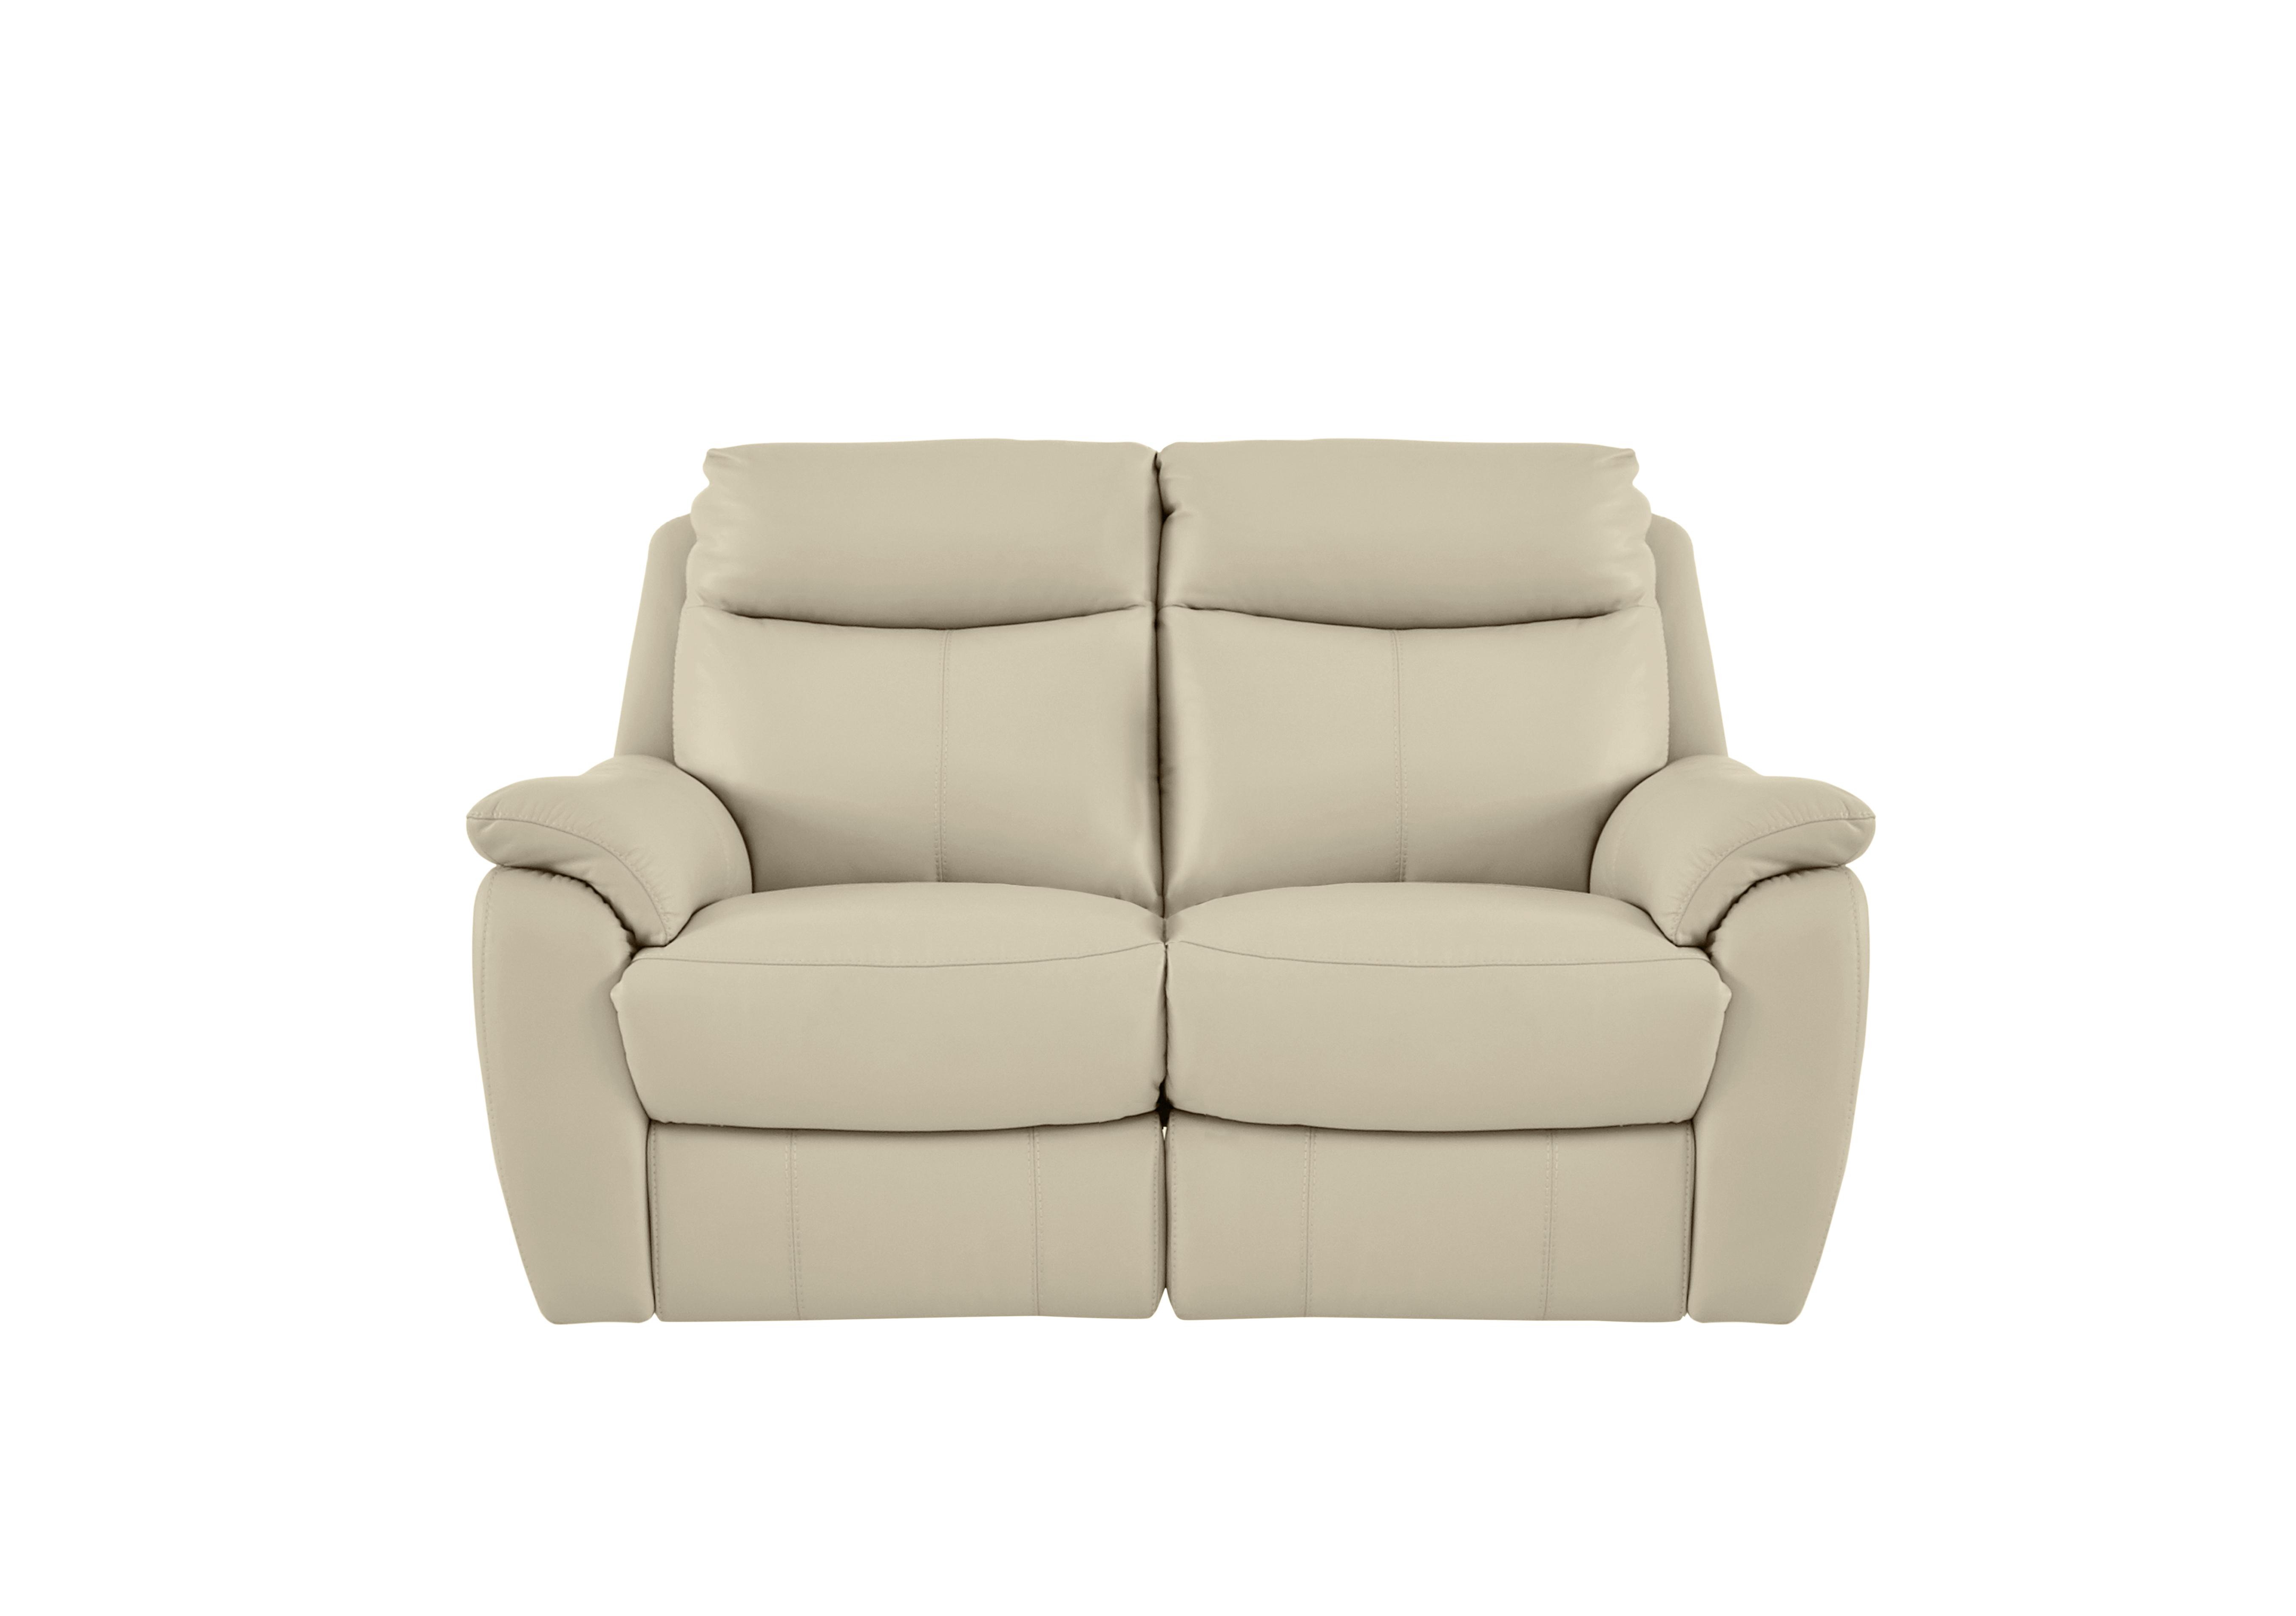 Snug 2 Seater Leather Sofa in Bv-862c Bisque on Furniture Village